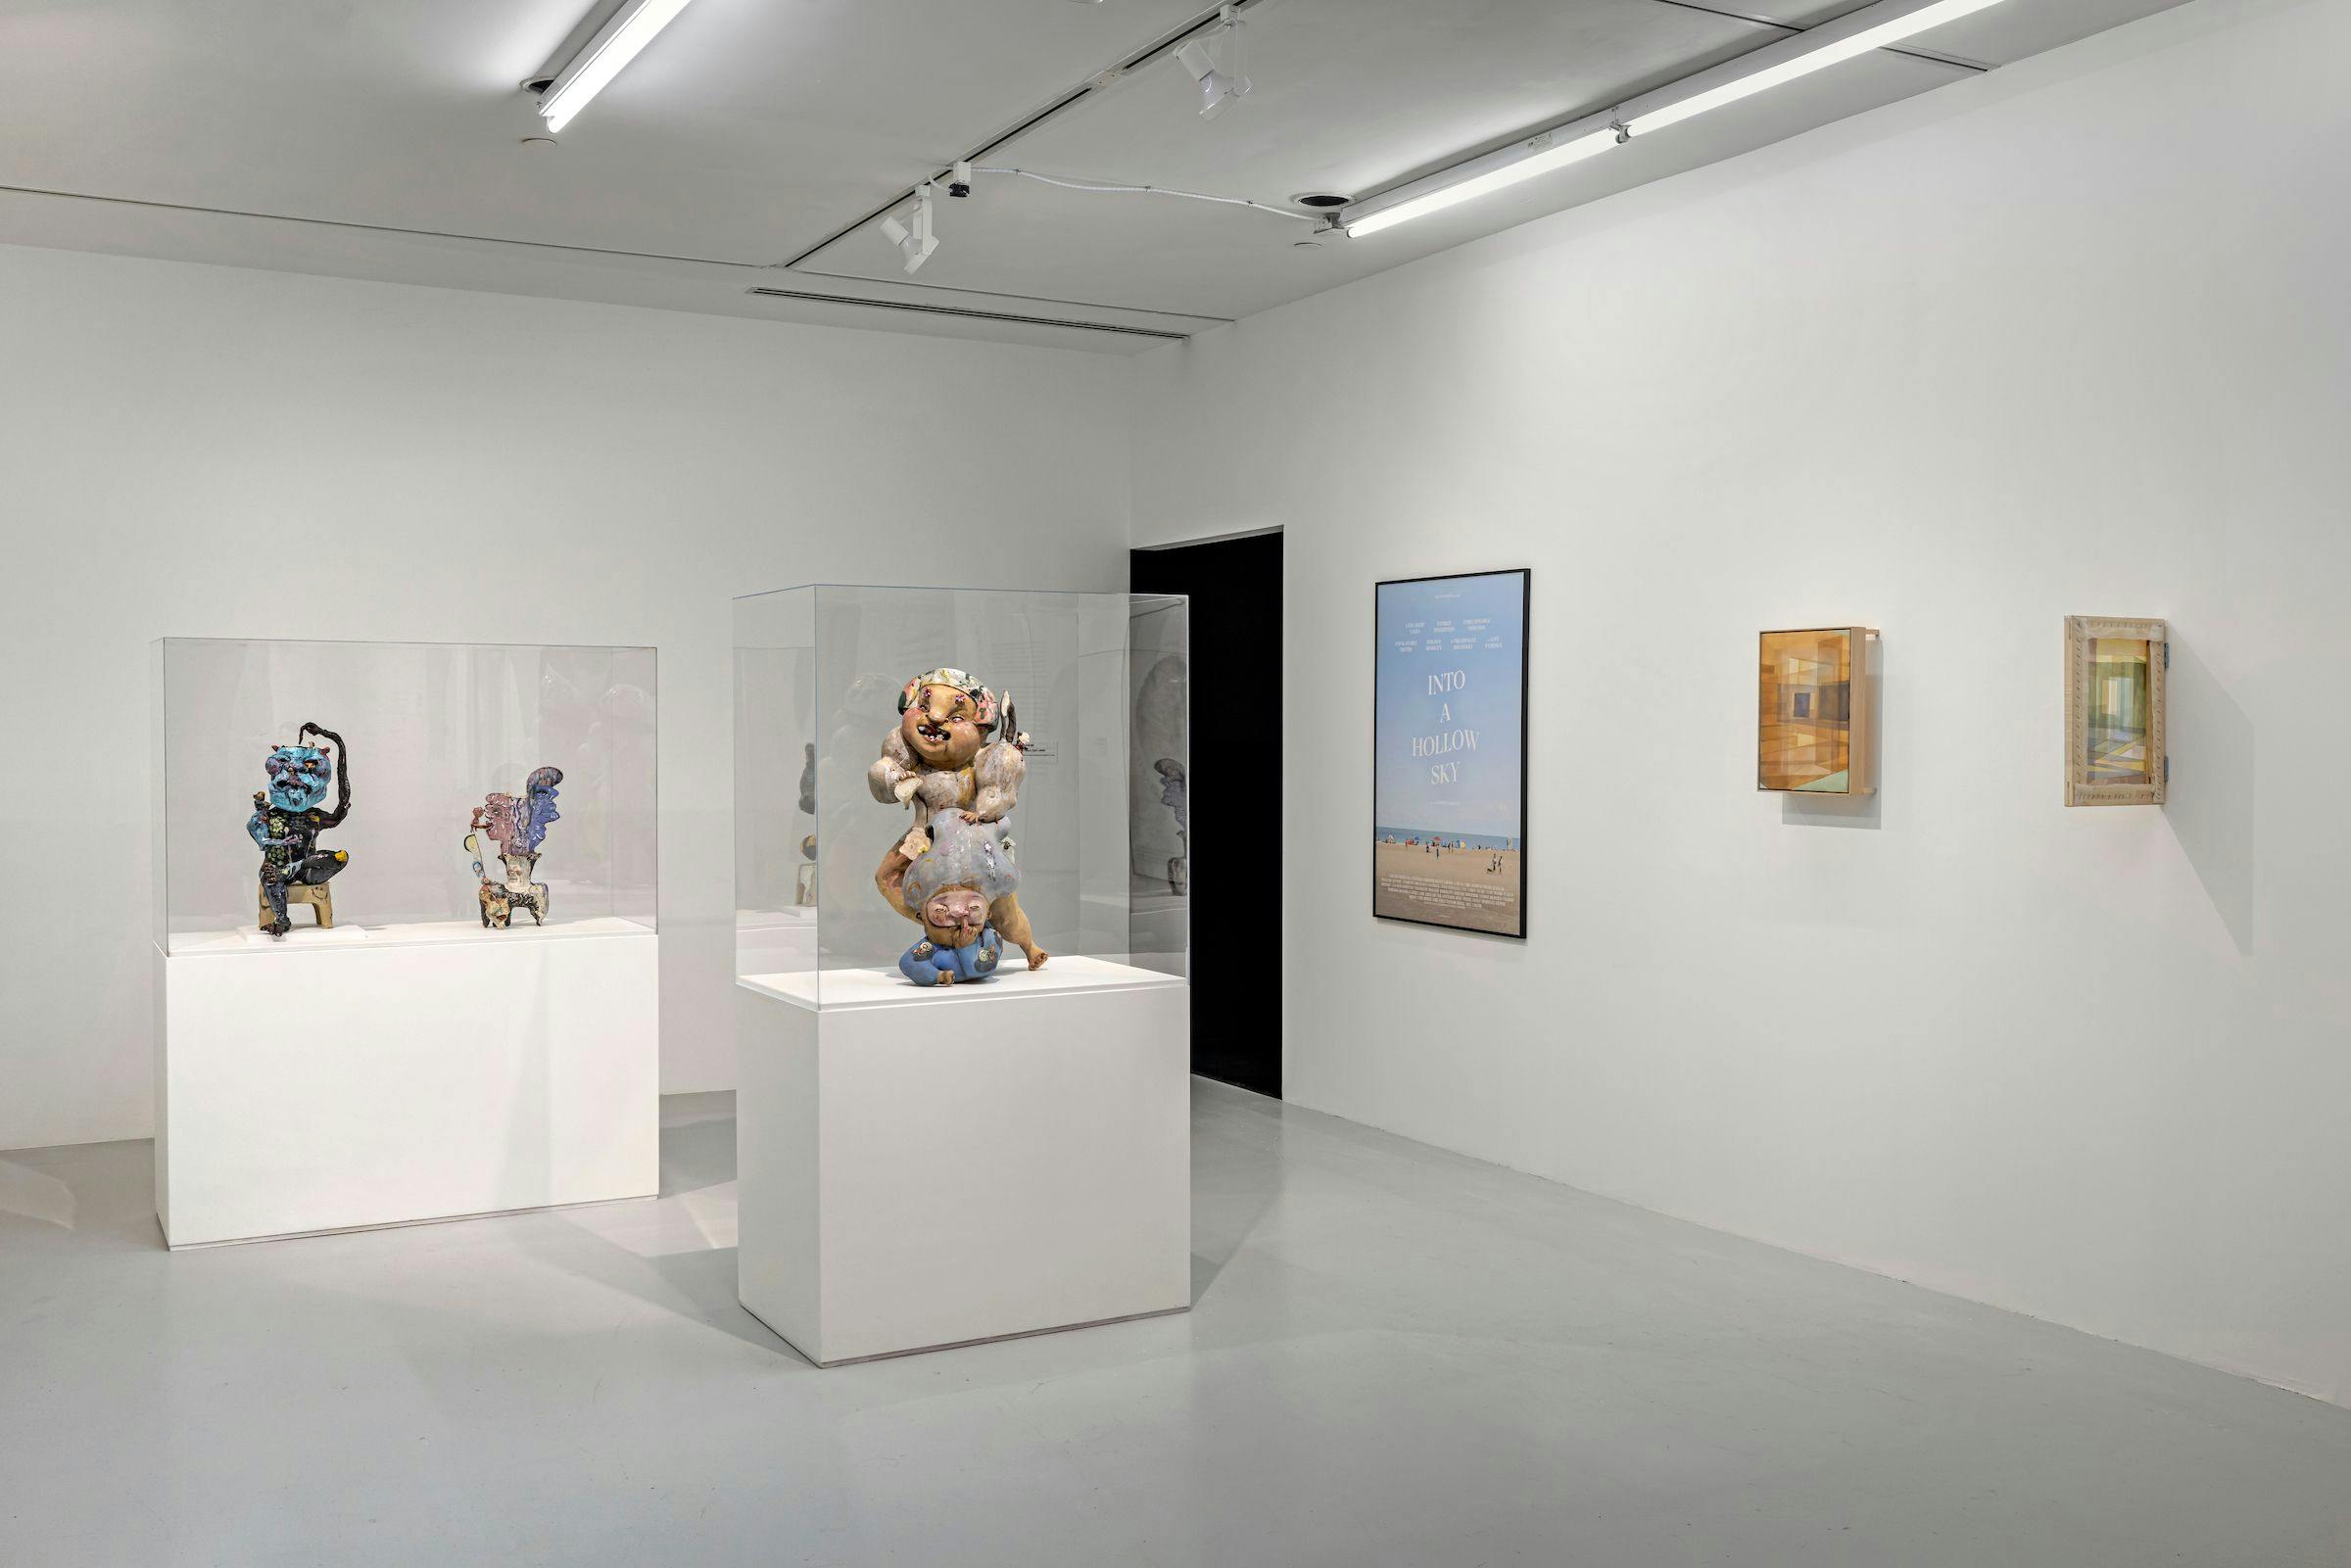 in parallel with works by Ella Gonzales, Erdem Taşdelen, and Sami Tsang. Installation view: The Power Plant, Toronto, 2023. Photo: Toni Hafkenscheid.